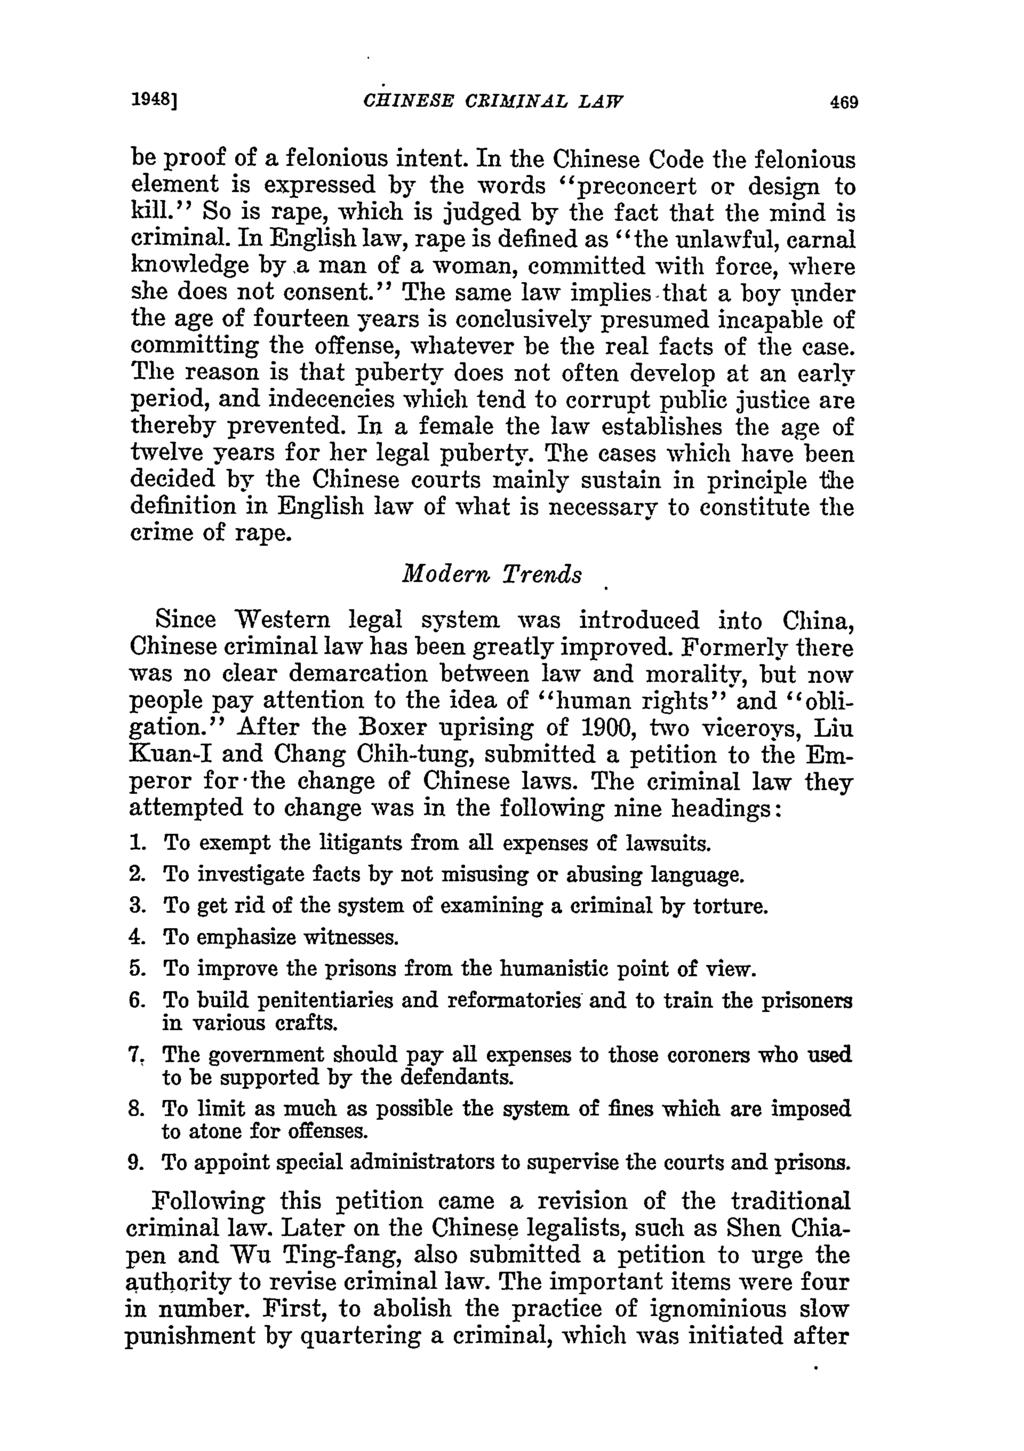 1948] CHINESE CRIMINAL LAWV be proof of a felonious intent. In the Chinese Code the felonious element is expressed by the words "preconcert or design to kill.